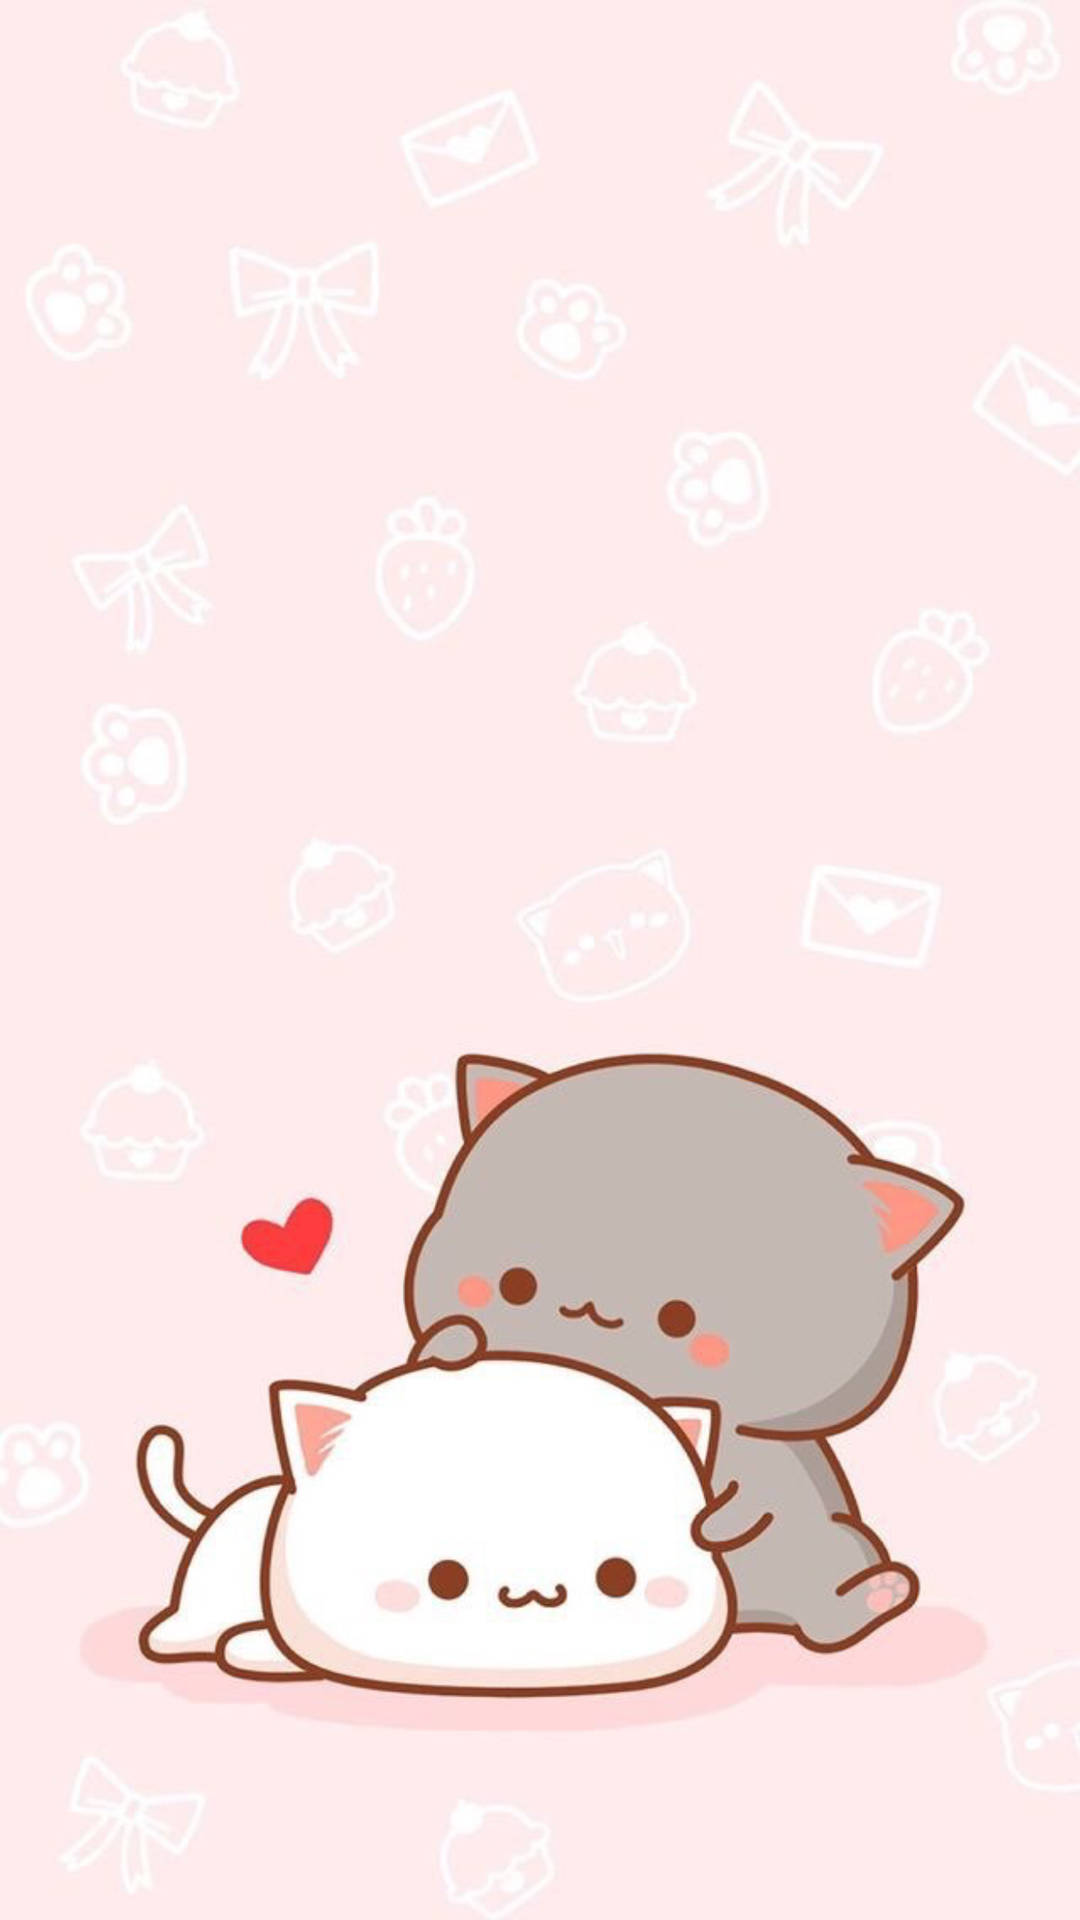 Couple Gray And White Cartoon Cats Wallpaper